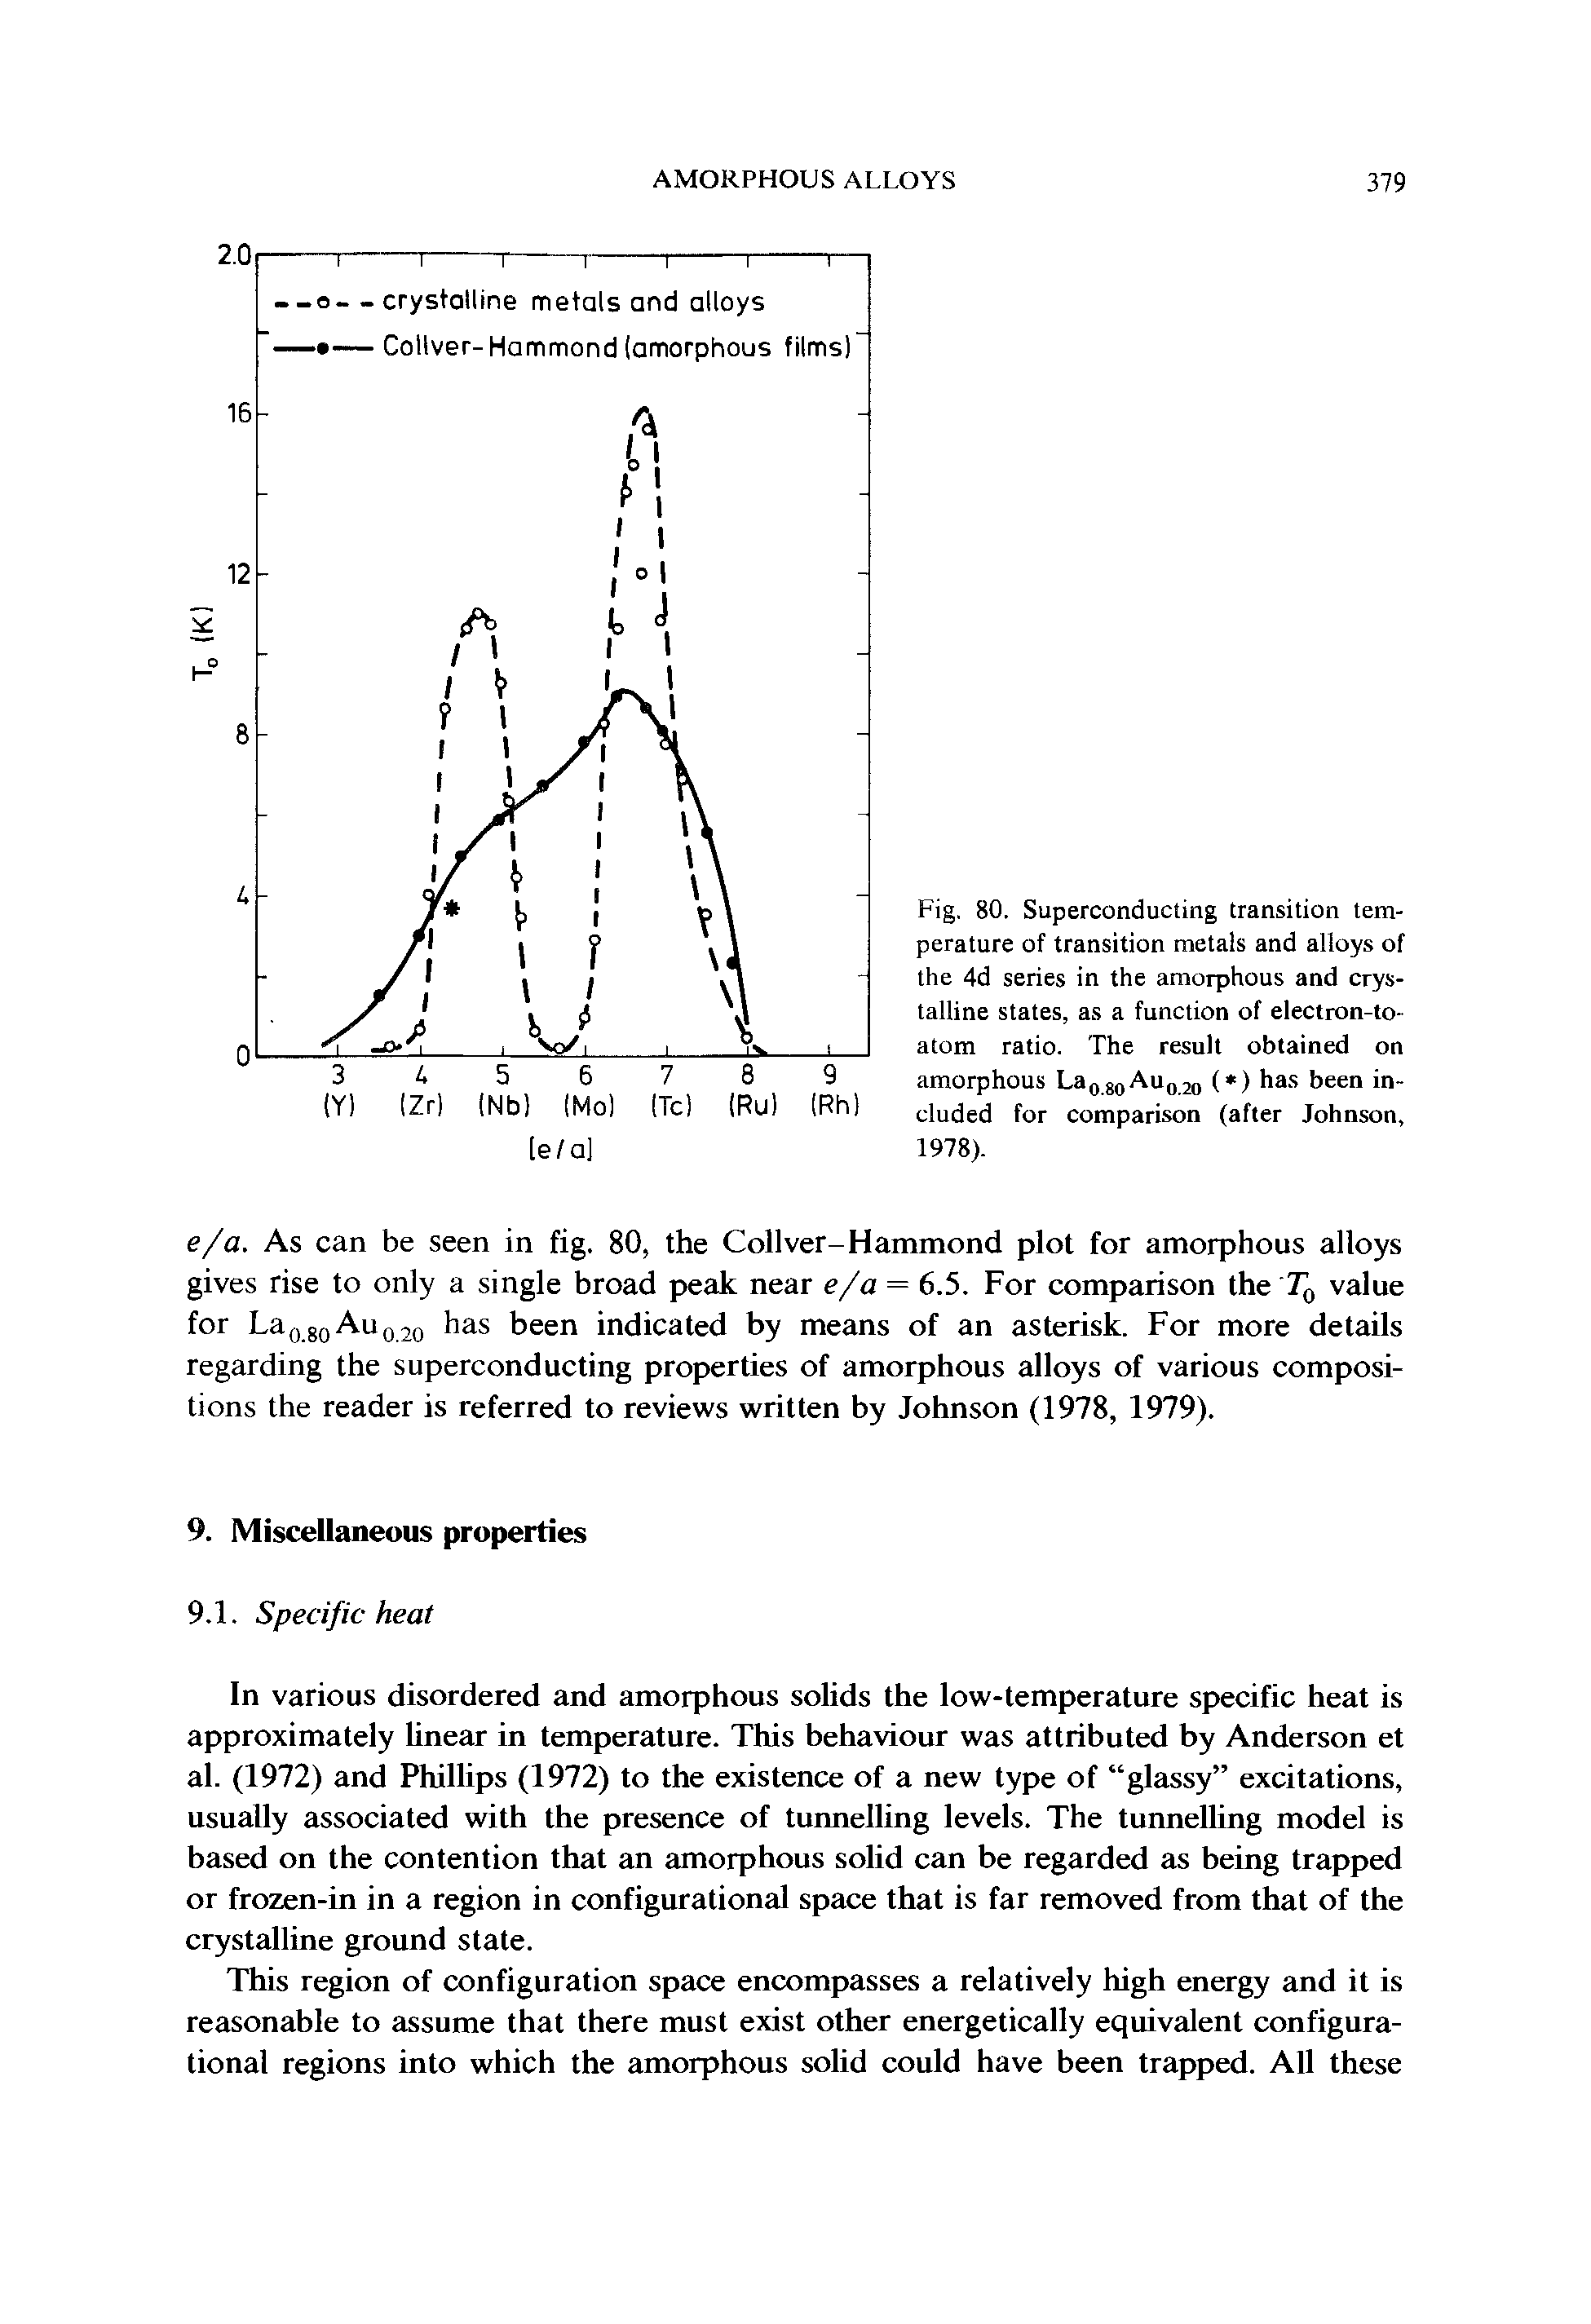 Fig. 80. Superconducting transition tent perature of transition metals and alloys of the 4d series in the amorphous and crystalline states, as a function of electron-to-atom ratio. The result obtained on amorphous La0j0AUo2o ( ) has been included for comparison (after Johnson, 1978).